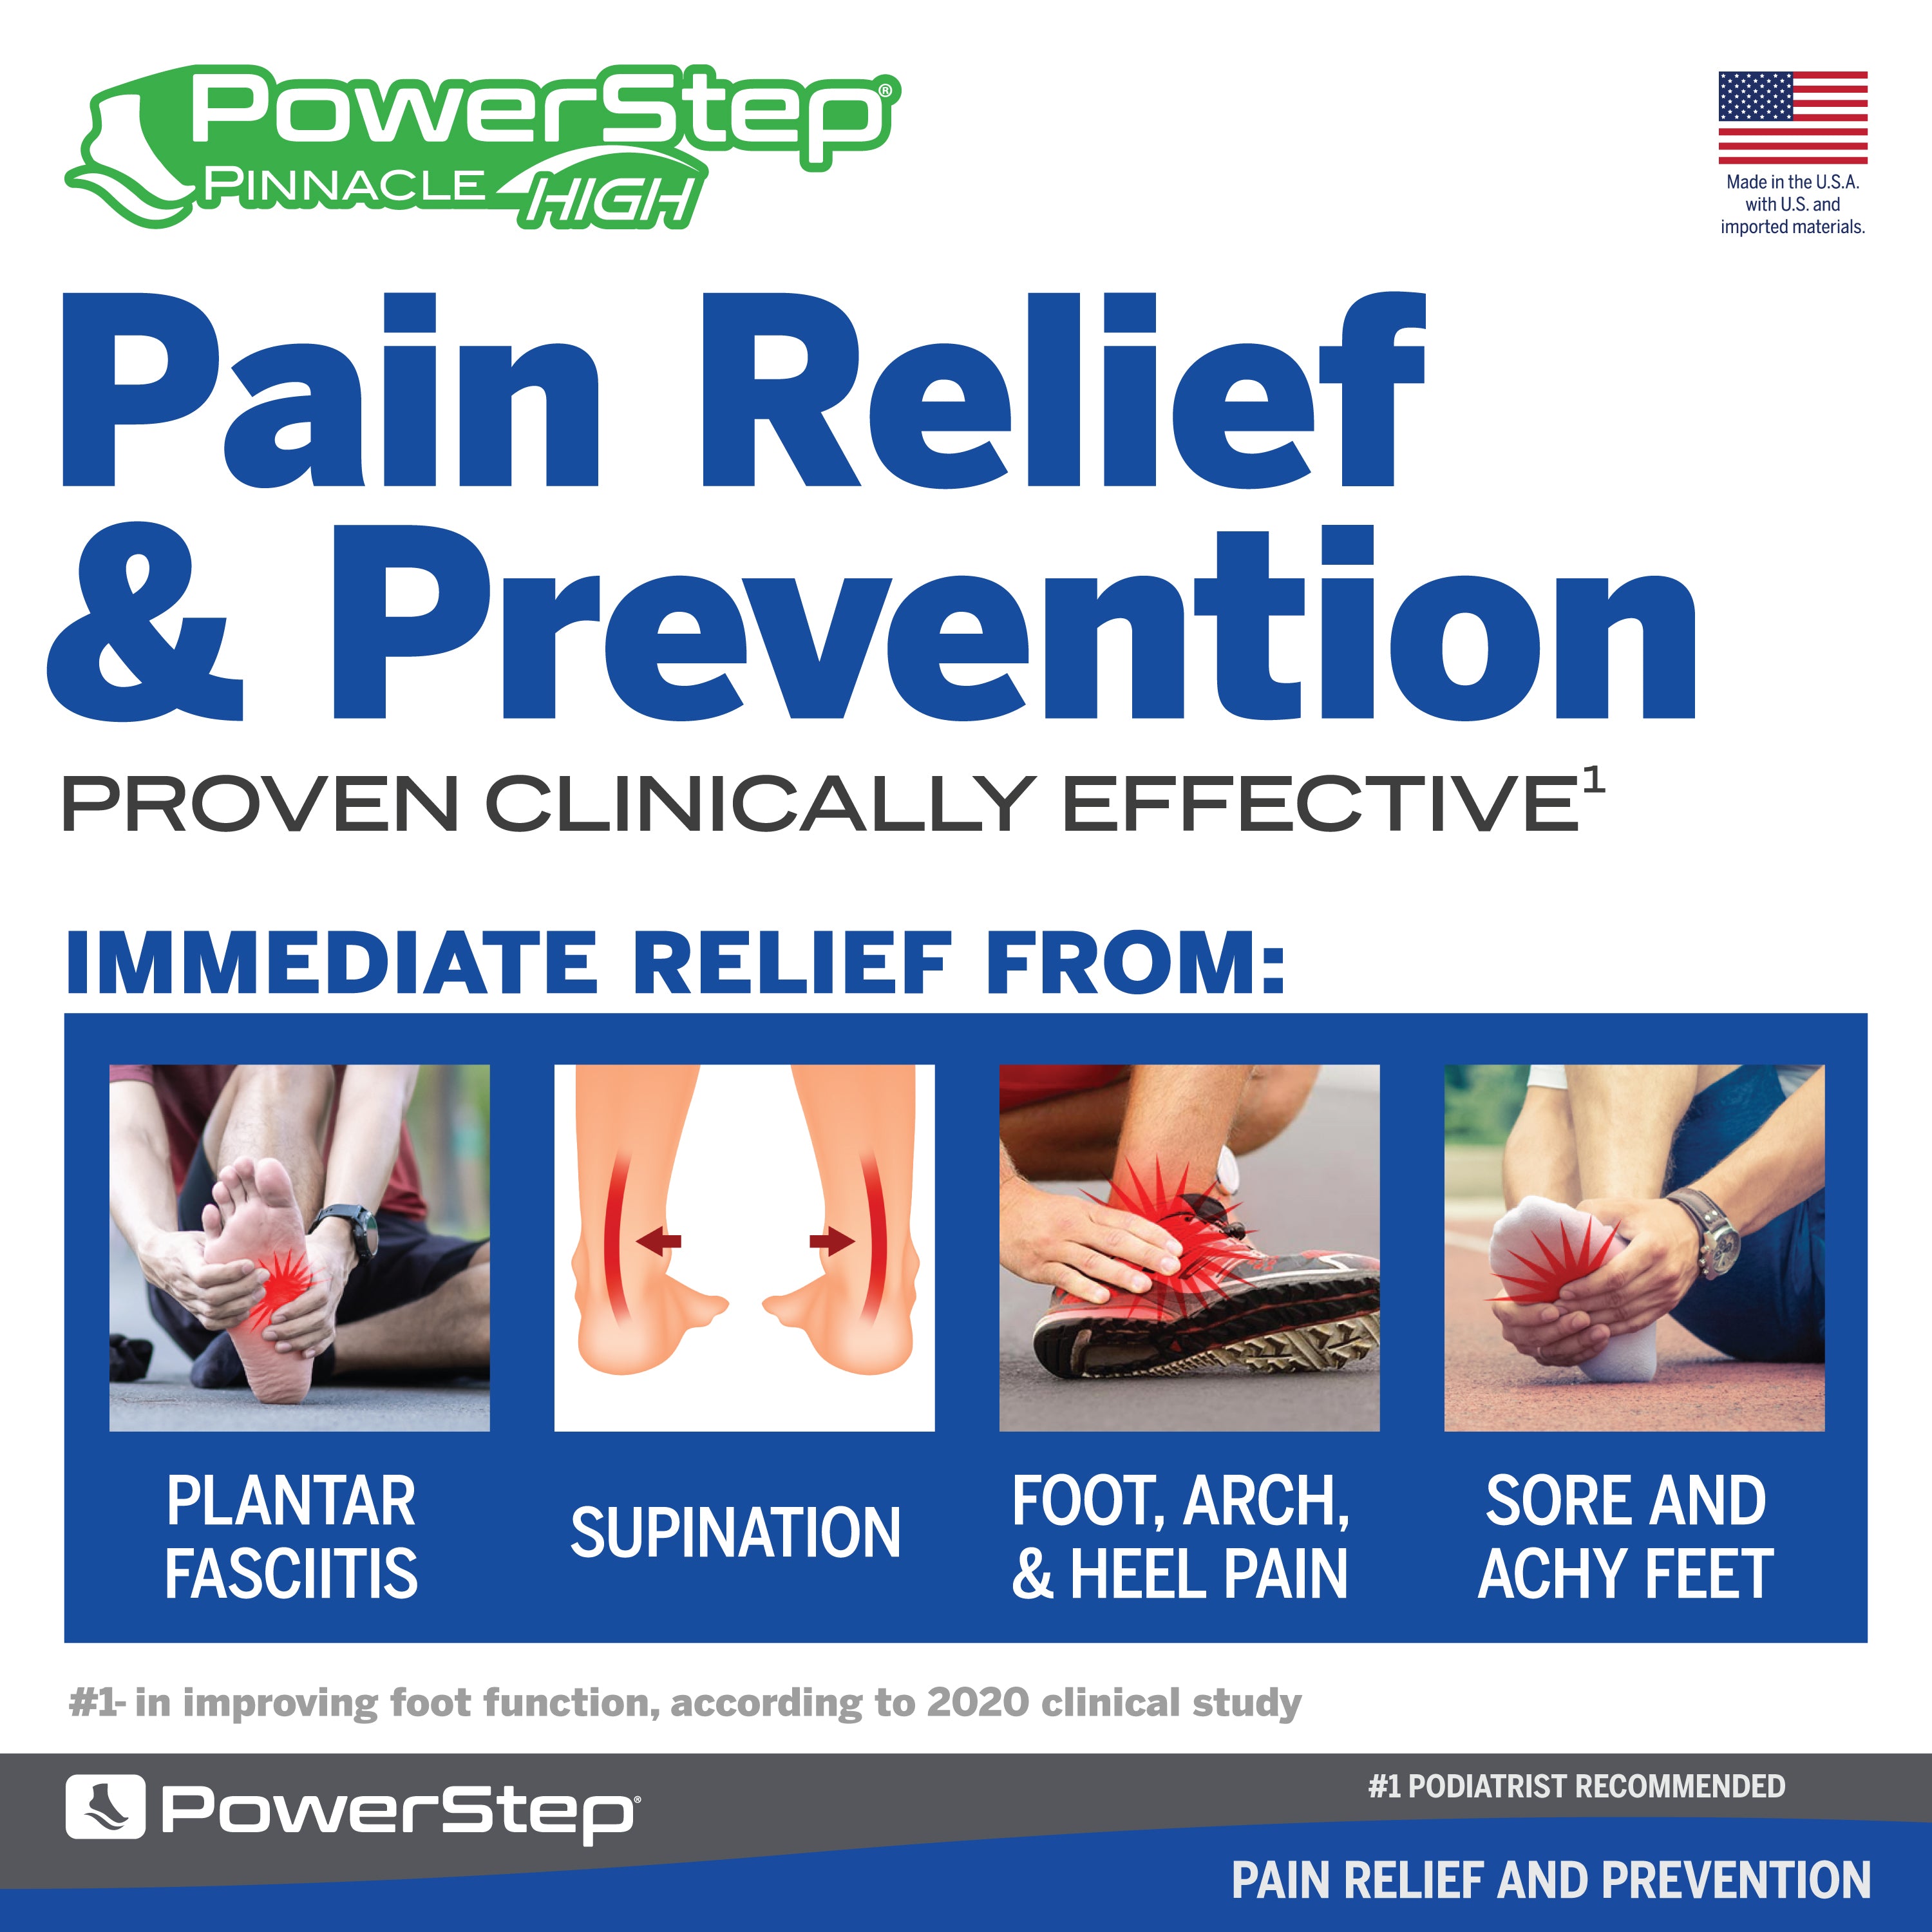 PowerStep Pinnacle High Orthotic Shoe Insoles, Made in the USA with US and imported materials, pain relief and prevention, proven clinically effective for immediate relief from plantar fasciitis, under-pronation and supination, foot, arch, and heel pain, sore, achy feet, number one in improving foot function according to 2020 clinical study, number one podiatrist recommended shoe orthotic for arch support, women’s shoe inserts, men’s orthotic shoe insoles, unisex orthotic arch support insoles